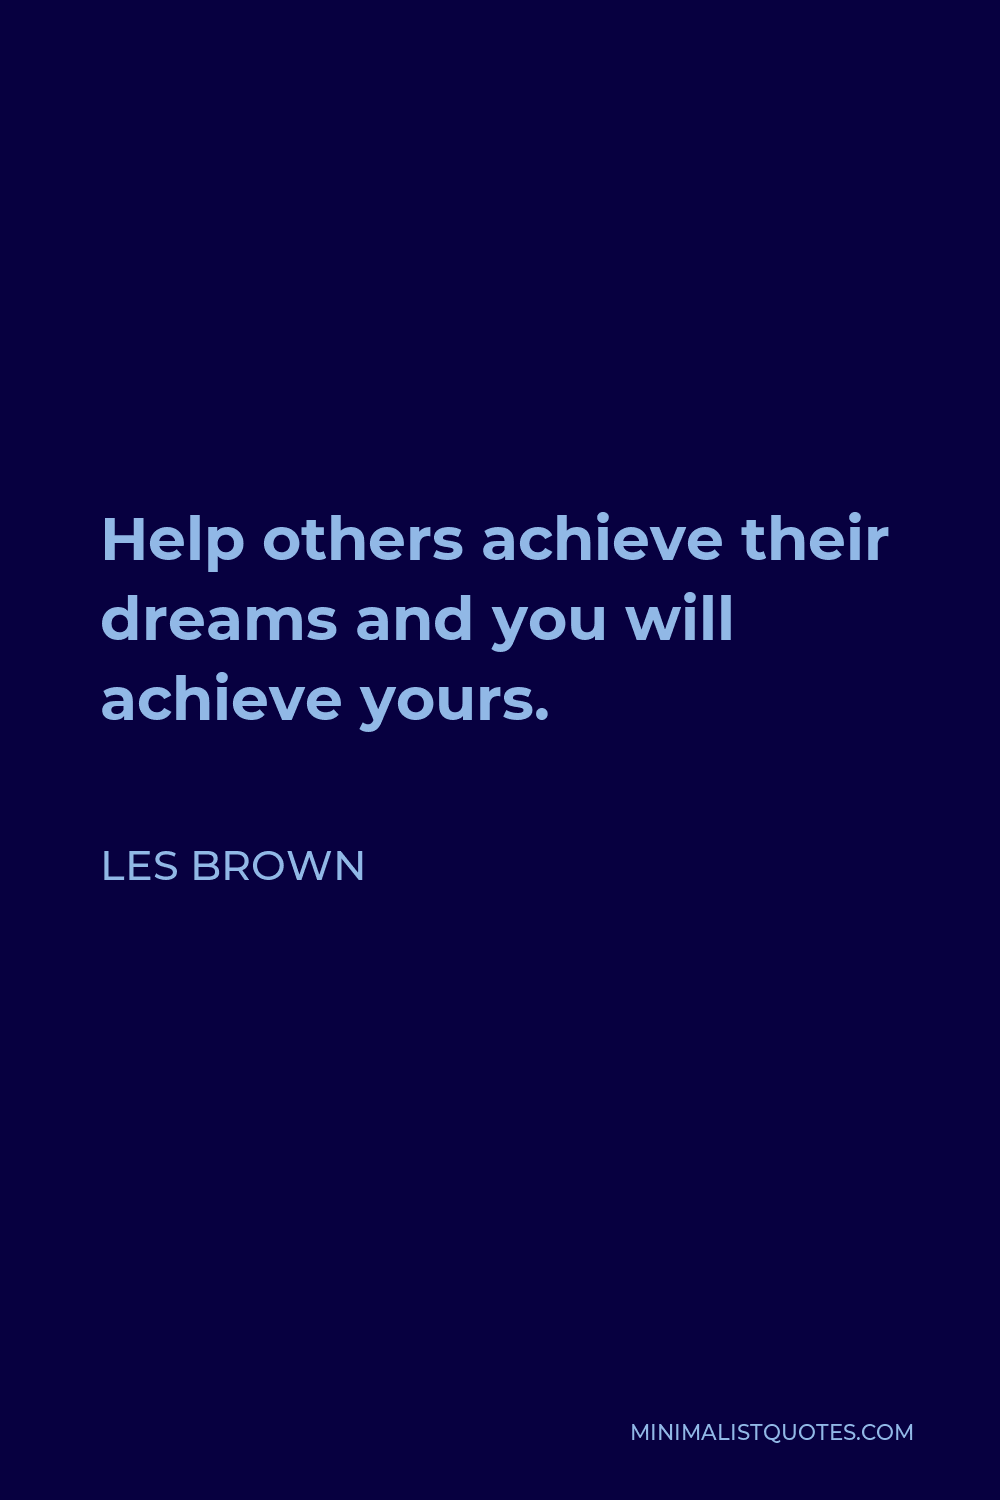 Les Brown Quote - Help others achieve their dreams and you will achieve yours.